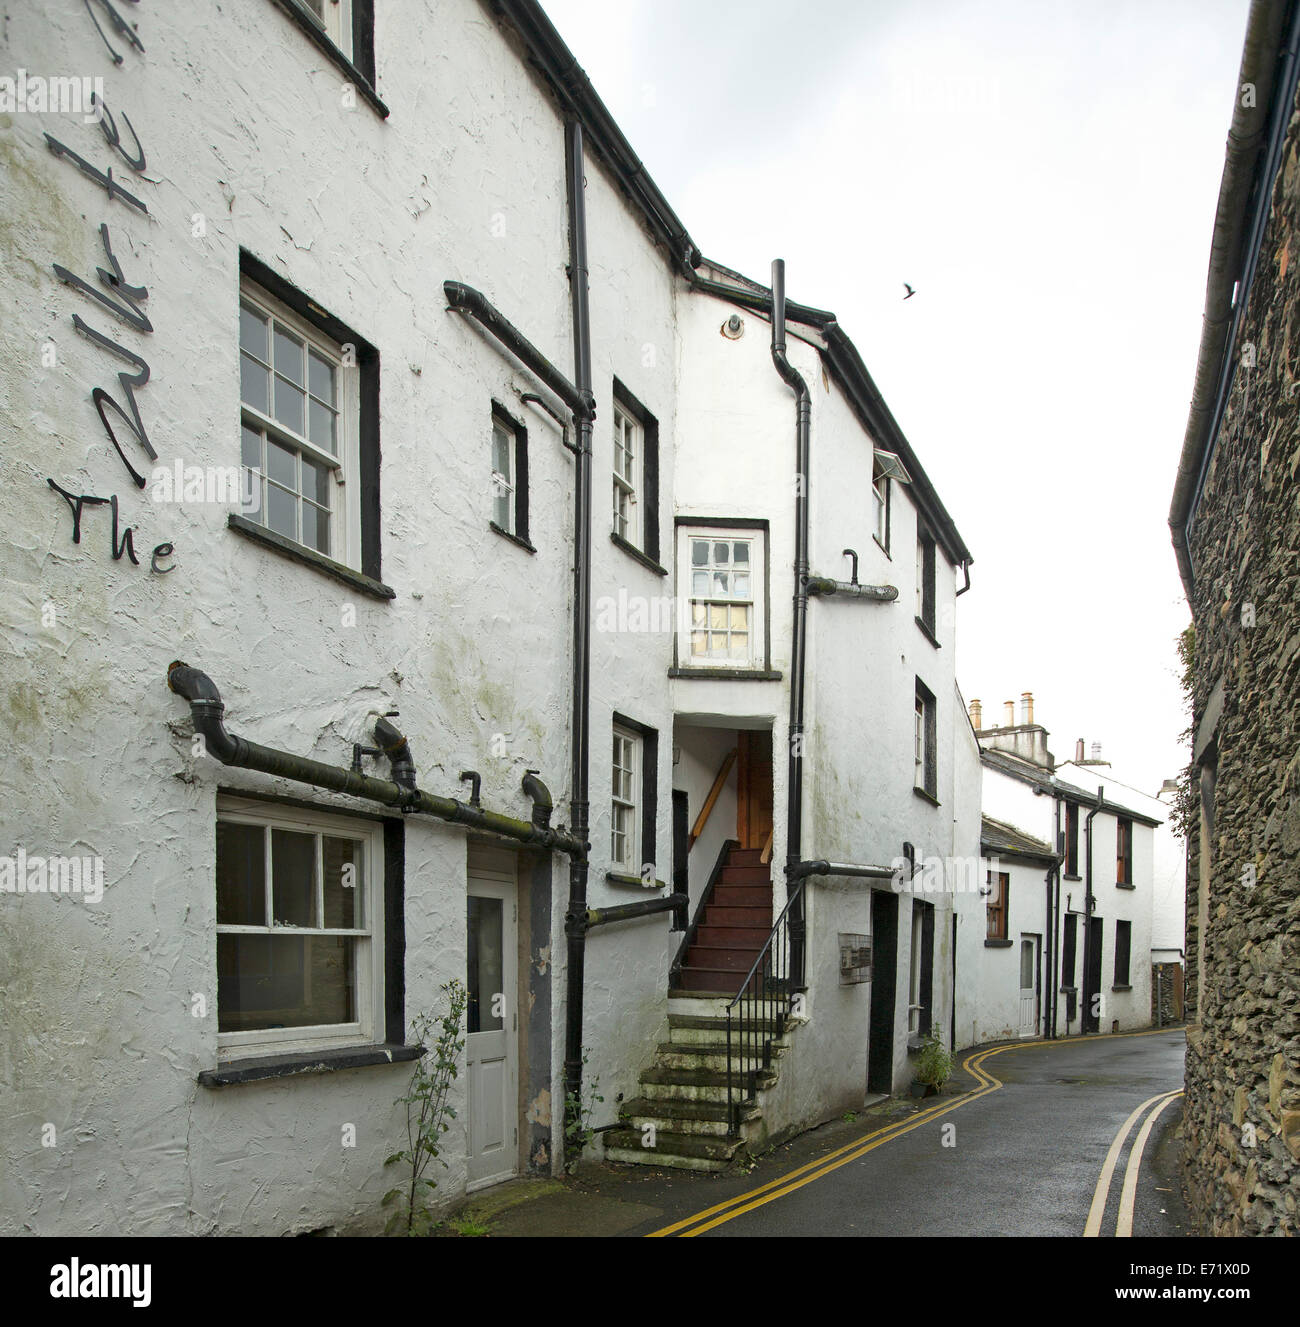 Narrow road winding through white painted stone buildings in old English village near Windemere, Lake District, Cumbria, England Stock Photo